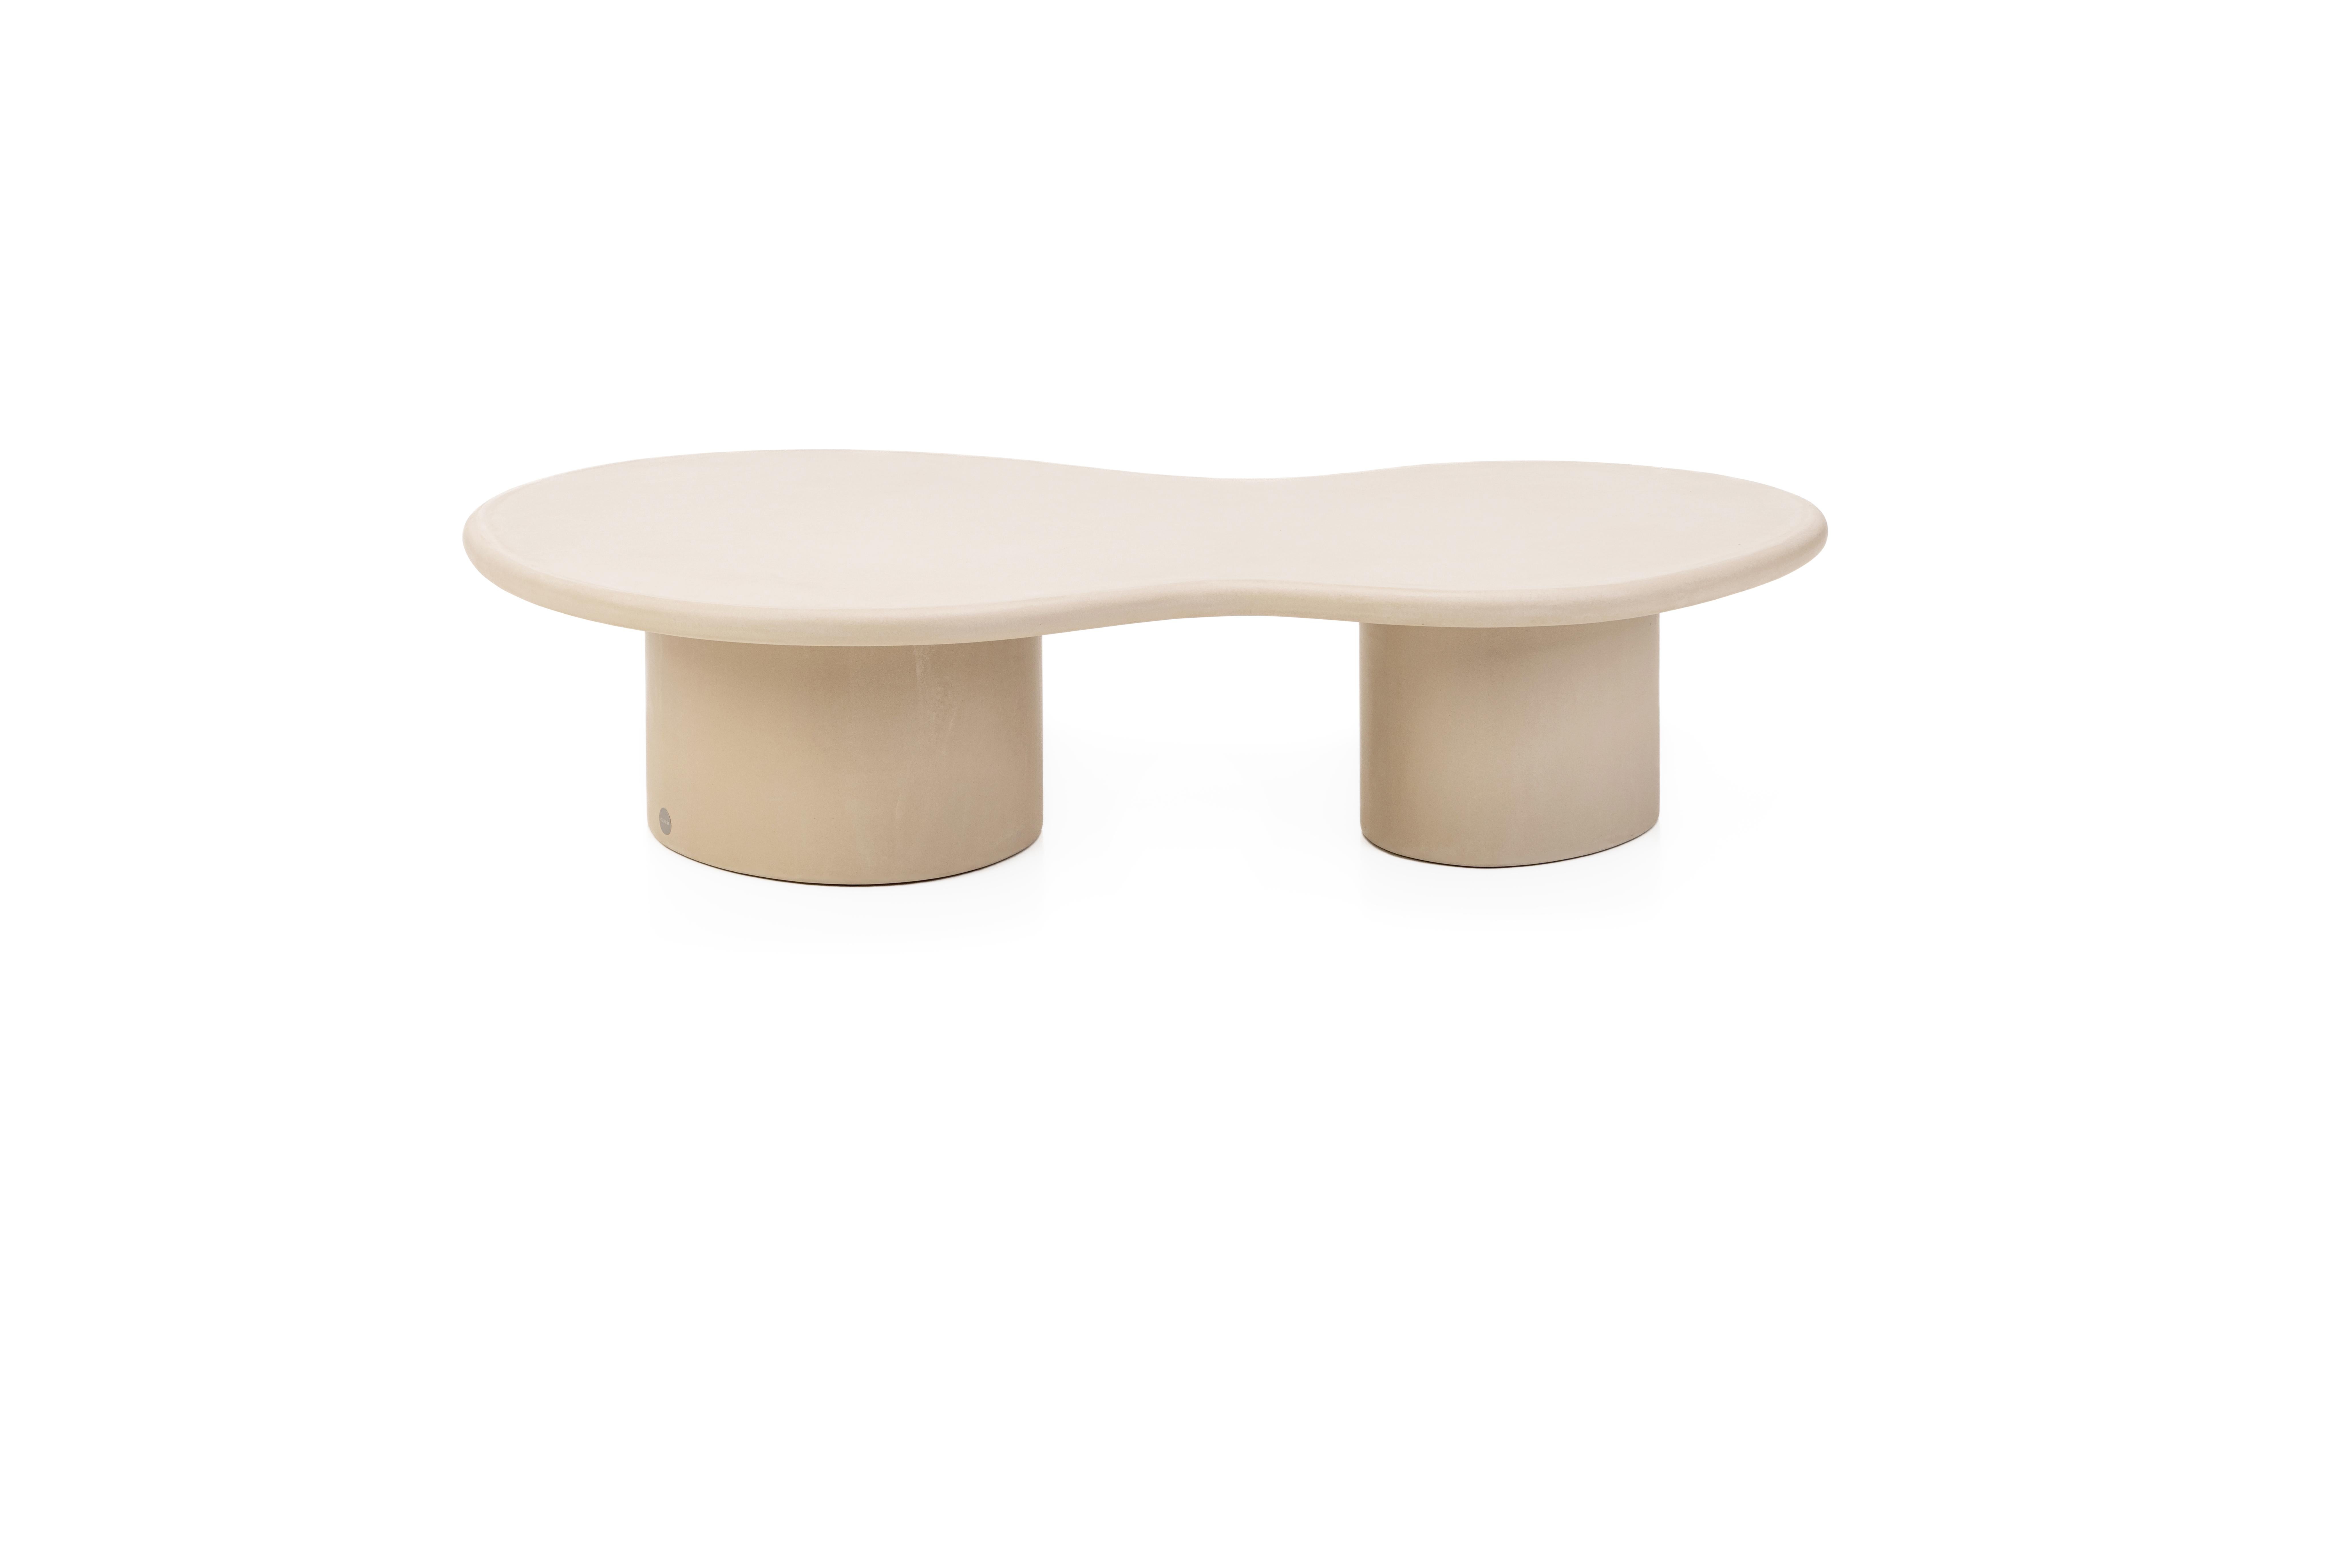 Contemporary Belgian design, handmade natural plaster coffee table with a textured and earthy character.

Indoor use (price outdoor +10%)

Latin adjective “ovum” /ˈo.u̯um/: egg

The Ovum coffee table is handcrafted with multiple layers Mortex® on a